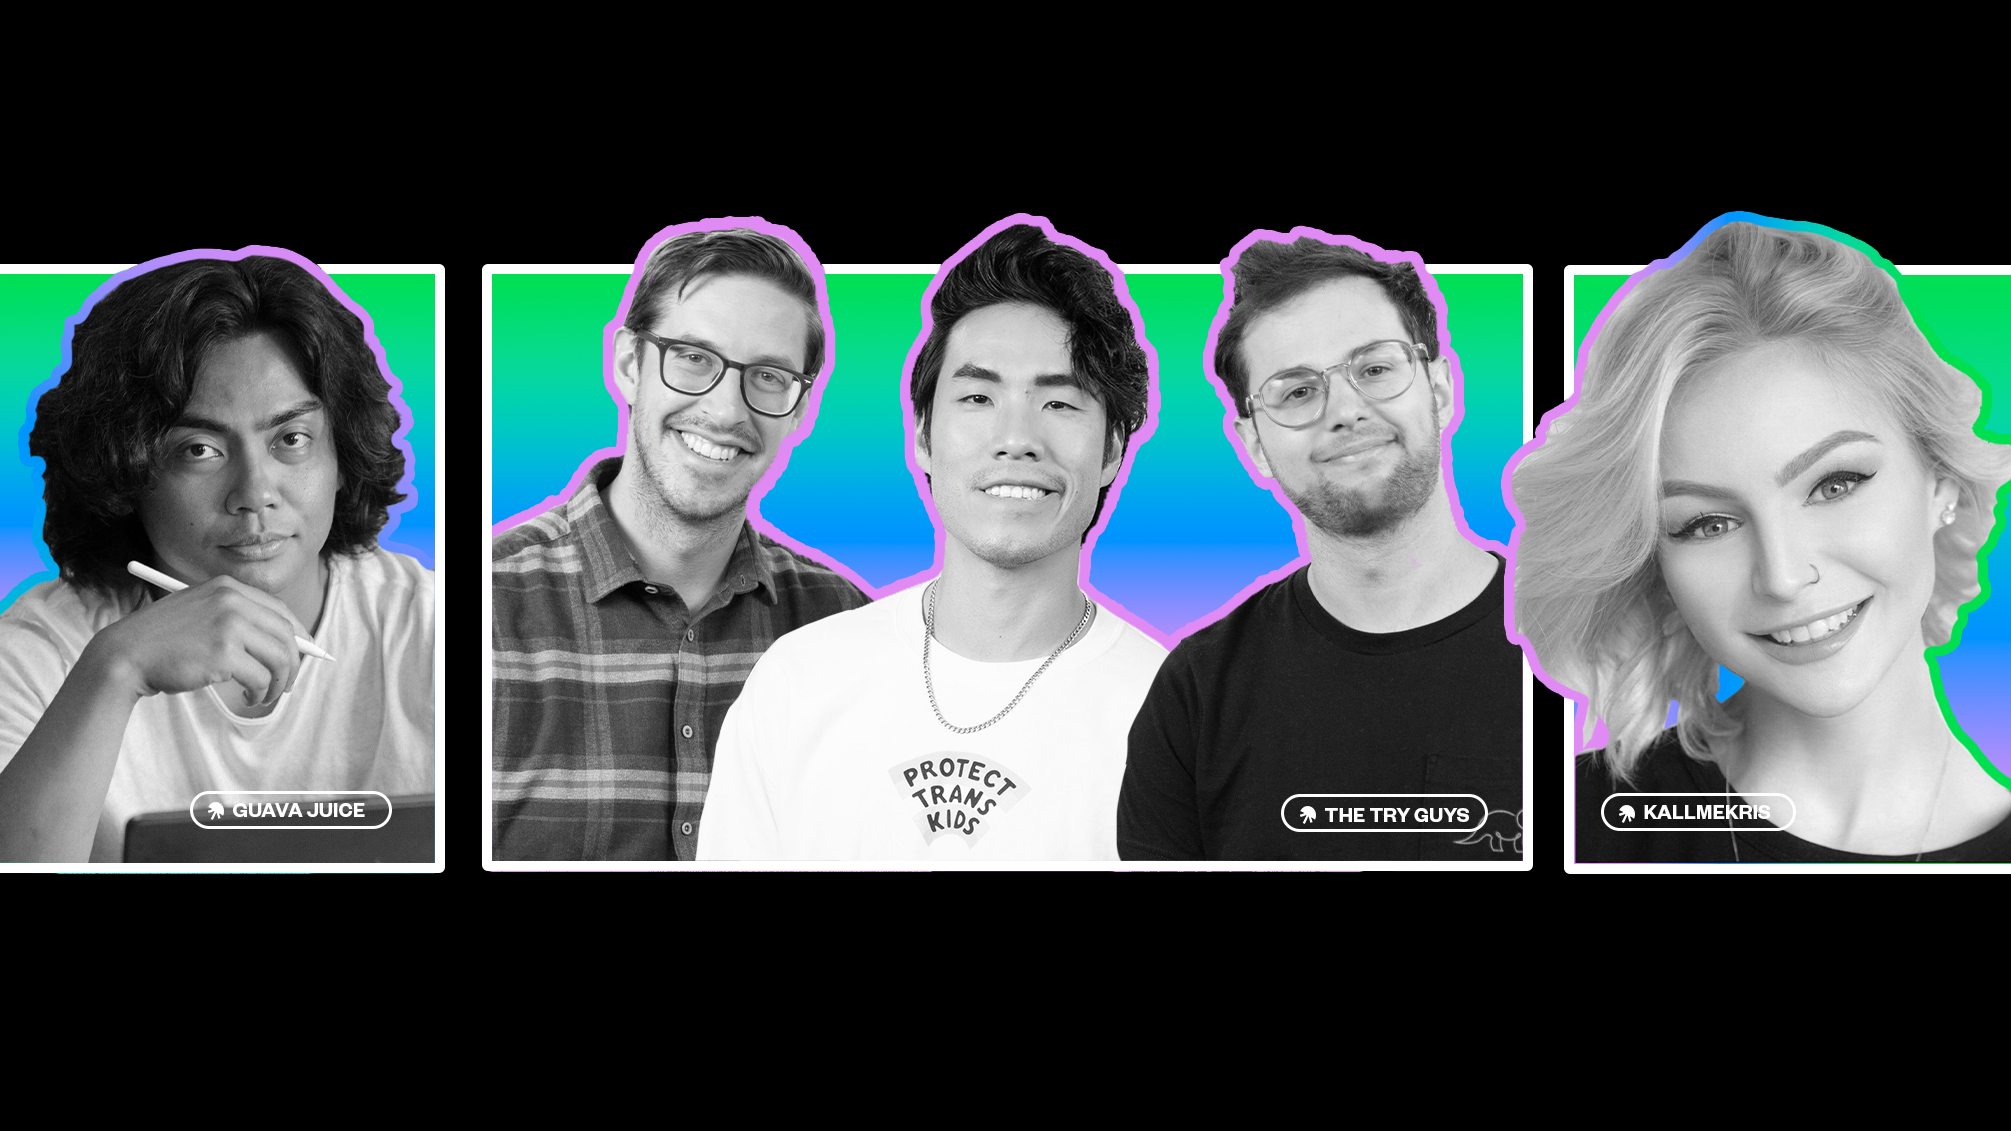 Creators Guava Juice, The Try Guys, and Kallmekris in black and white on rainbow background